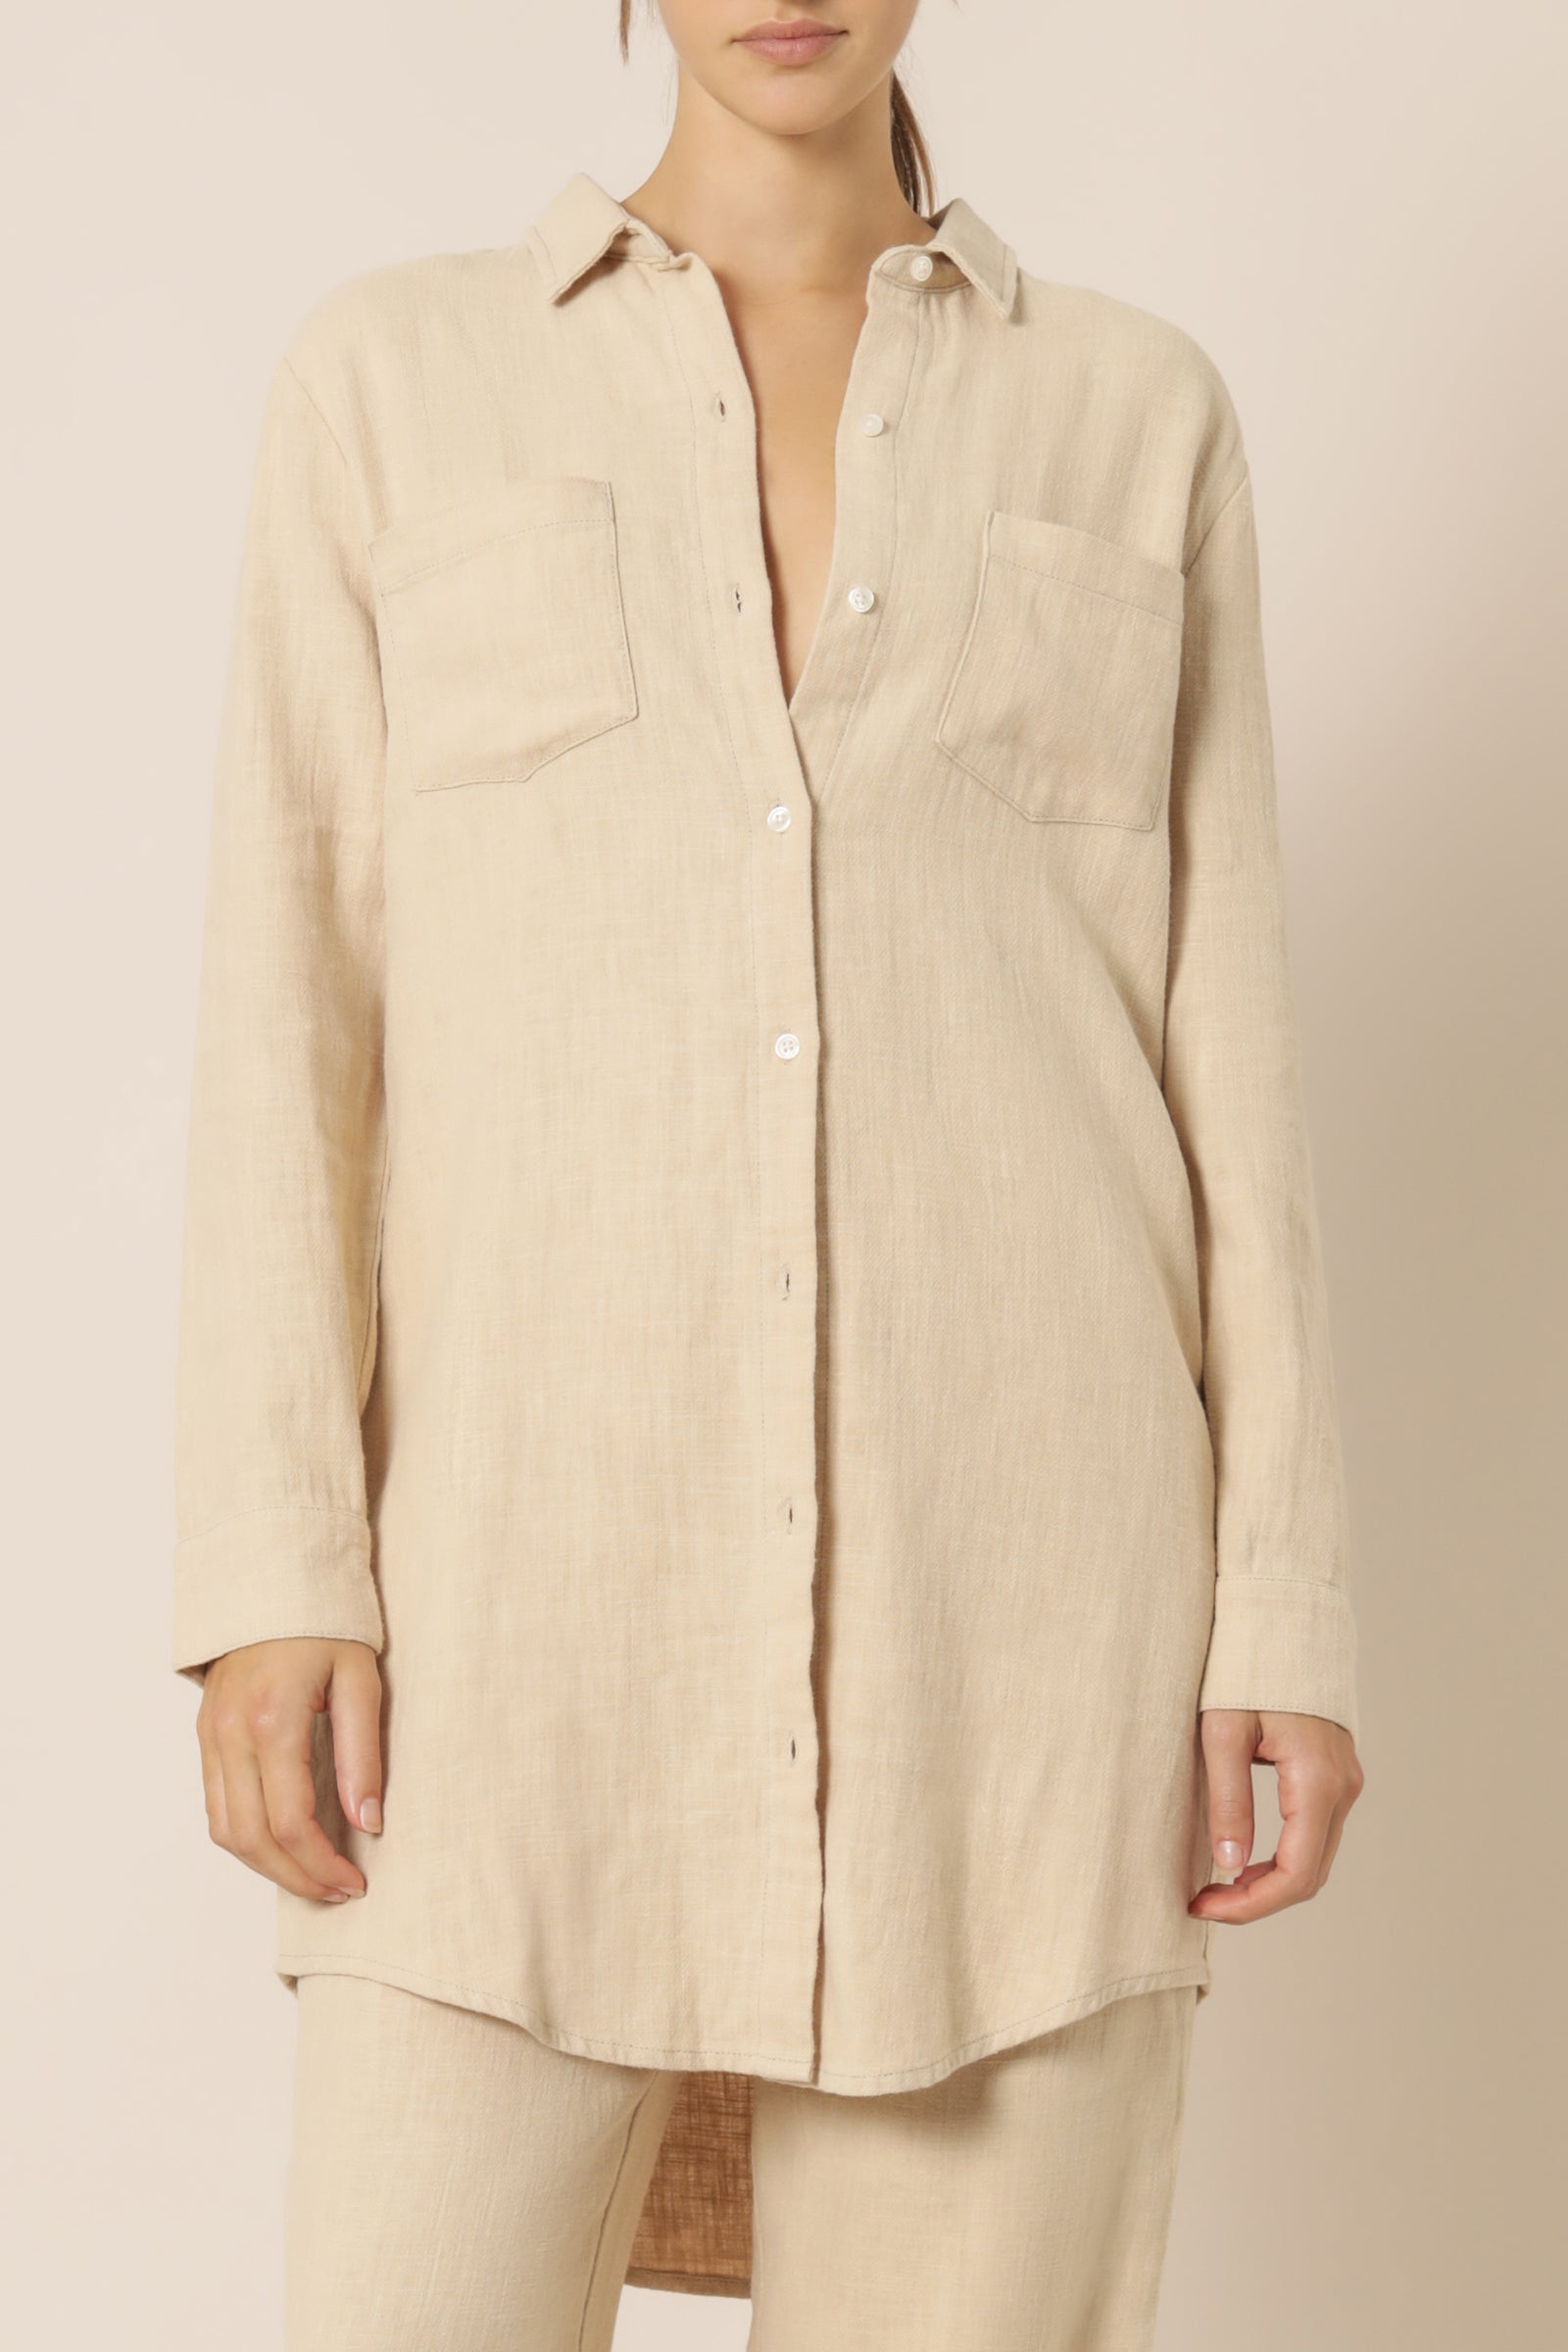 Nude Lucy marvin longline shirt oat shirt